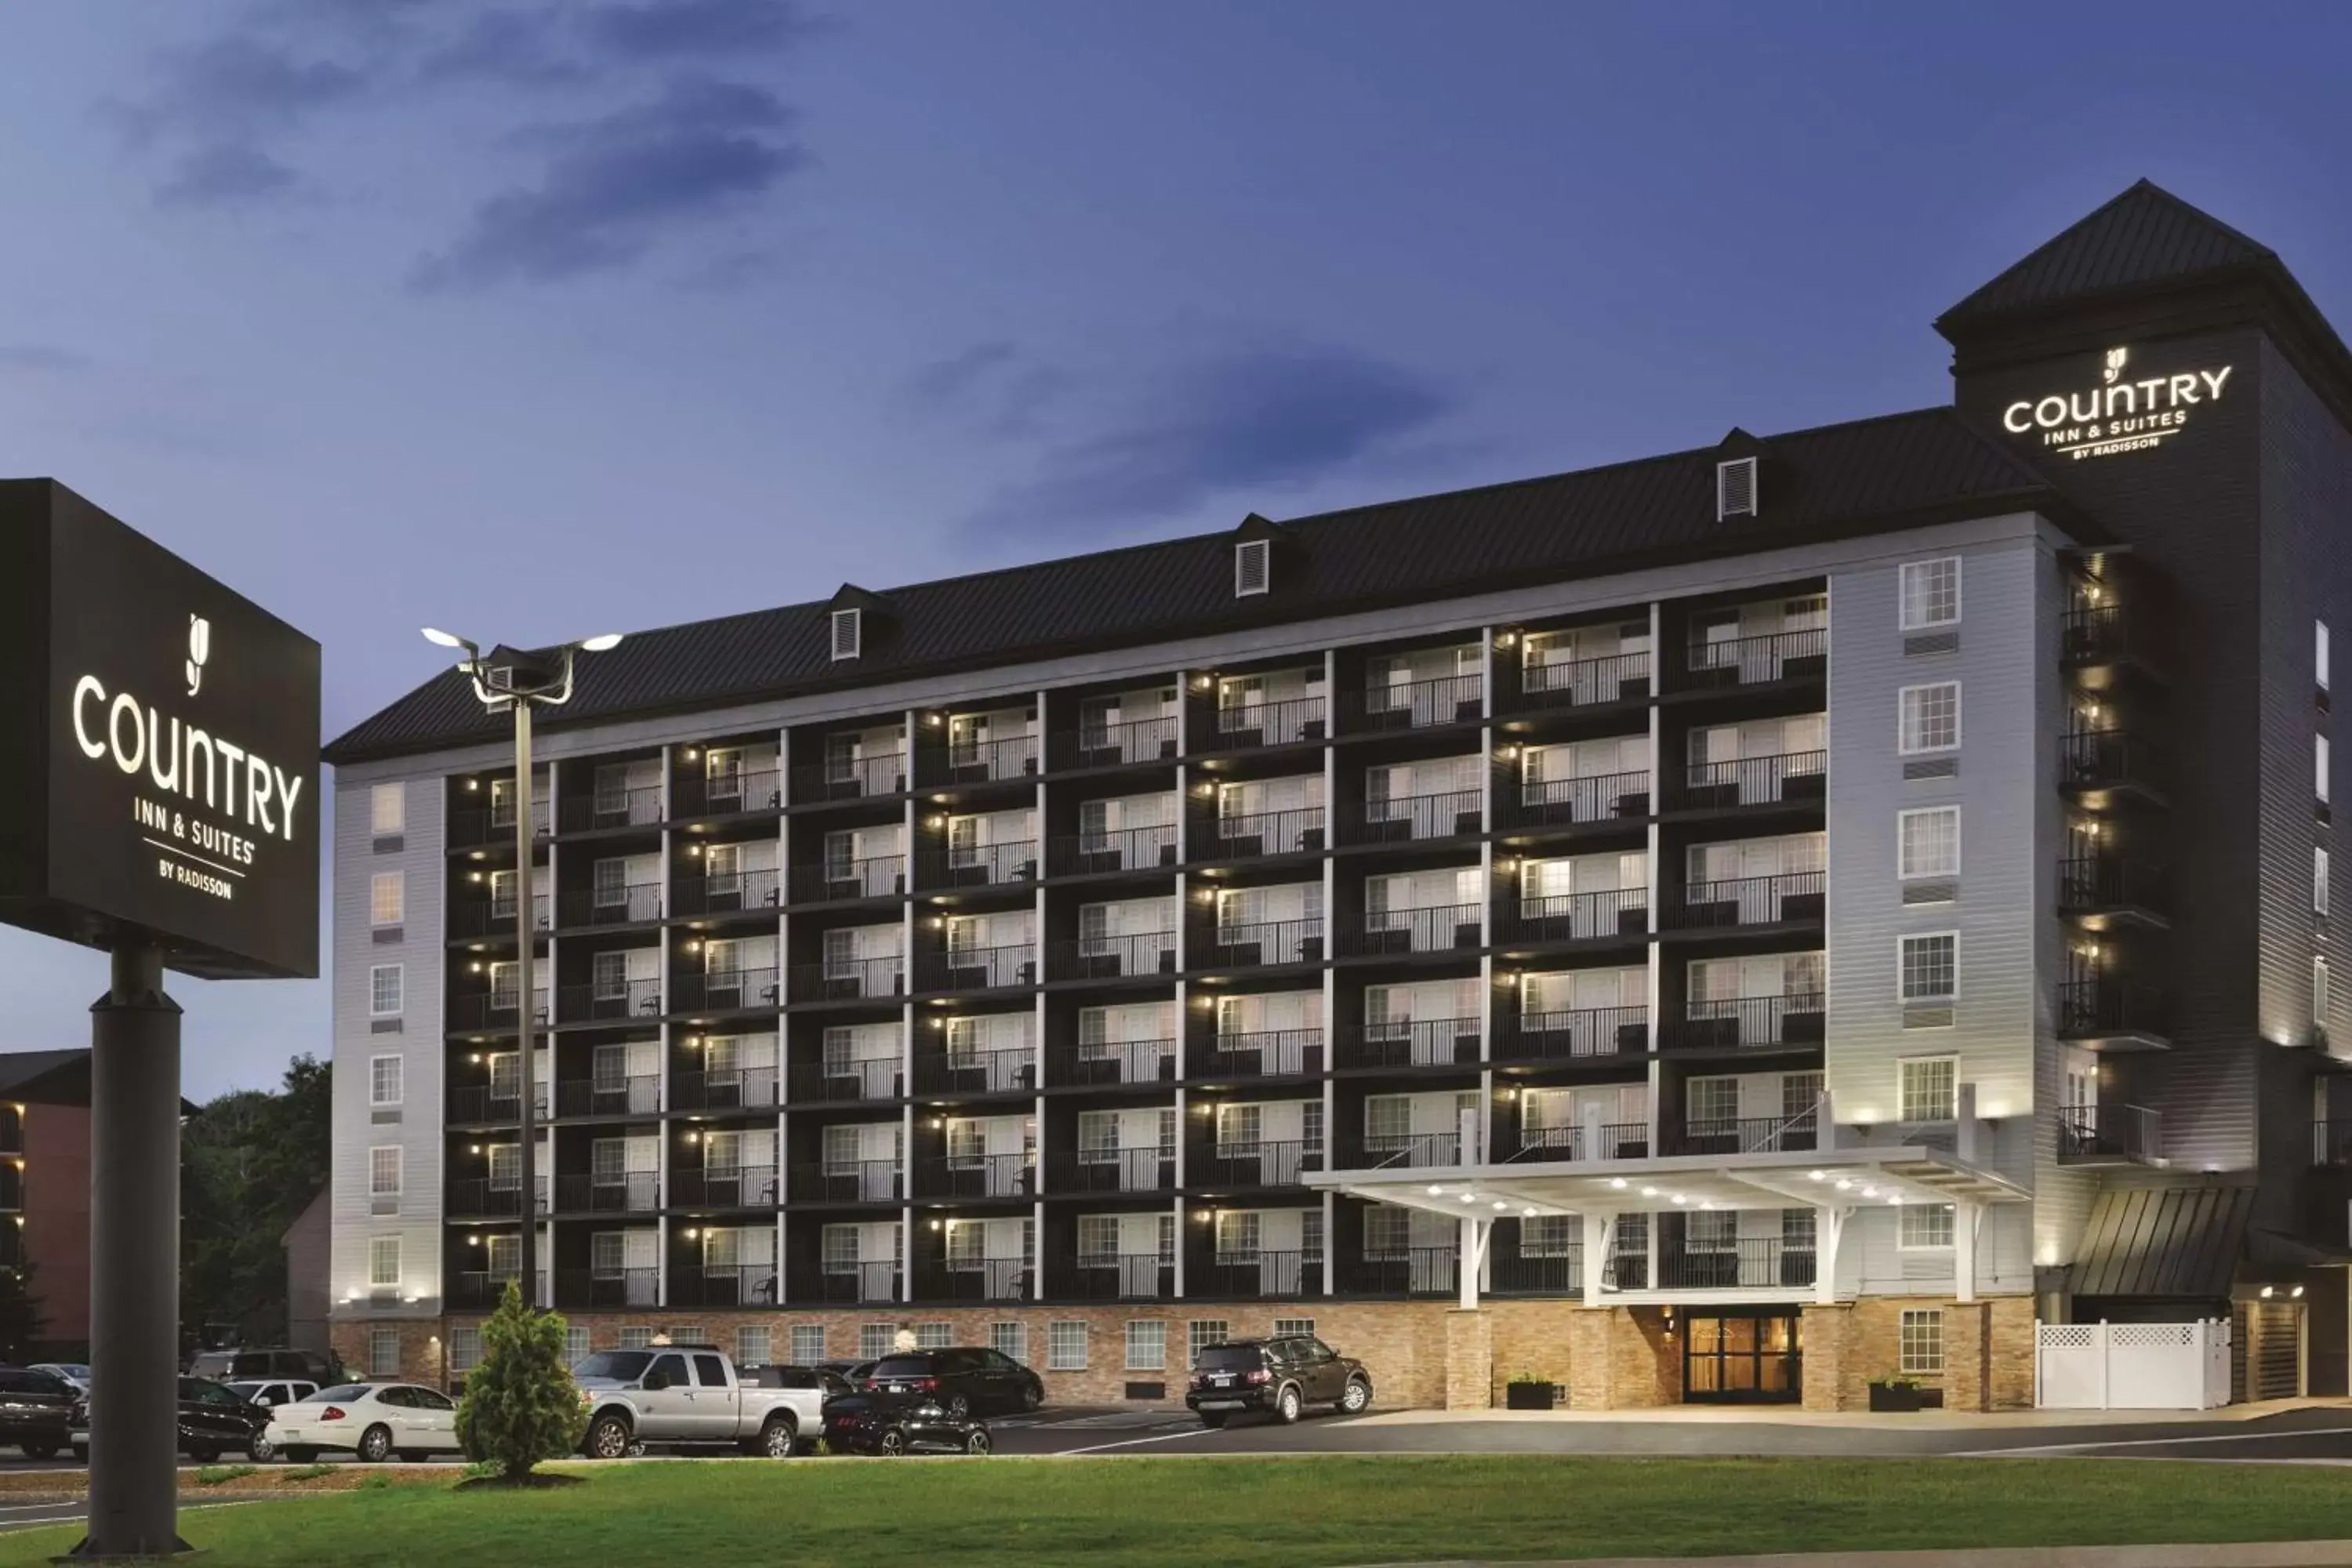 Property building in Country Inn & Suites by Radisson, Pigeon Forge South, TN